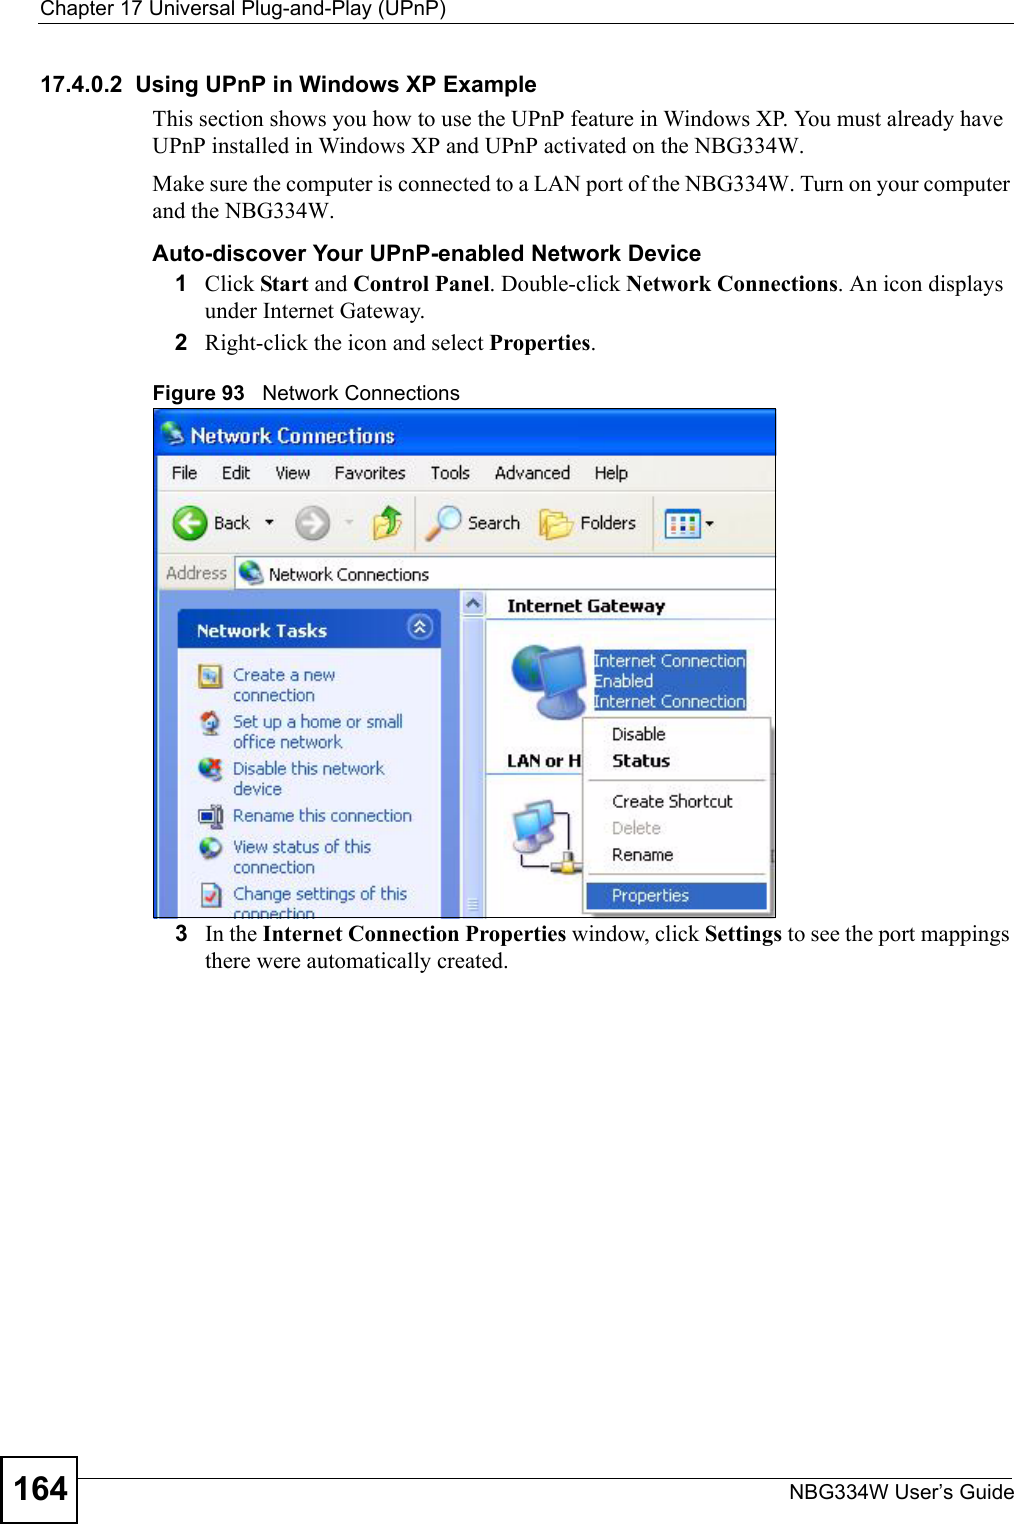 Chapter 17 Universal Plug-and-Play (UPnP)NBG334W User’s Guide16417.4.0.2  Using UPnP in Windows XP ExampleThis section shows you how to use the UPnP feature in Windows XP. You must already have UPnP installed in Windows XP and UPnP activated on the NBG334W.Make sure the computer is connected to a LAN port of the NBG334W. Turn on your computer and the NBG334W. Auto-discover Your UPnP-enabled Network Device1Click Start and Control Panel. Double-click Network Connections. An icon displays under Internet Gateway.2Right-click the icon and select Properties. Figure 93   Network Connections3In the Internet Connection Properties window, click Settings to see the port mappings there were automatically created. 